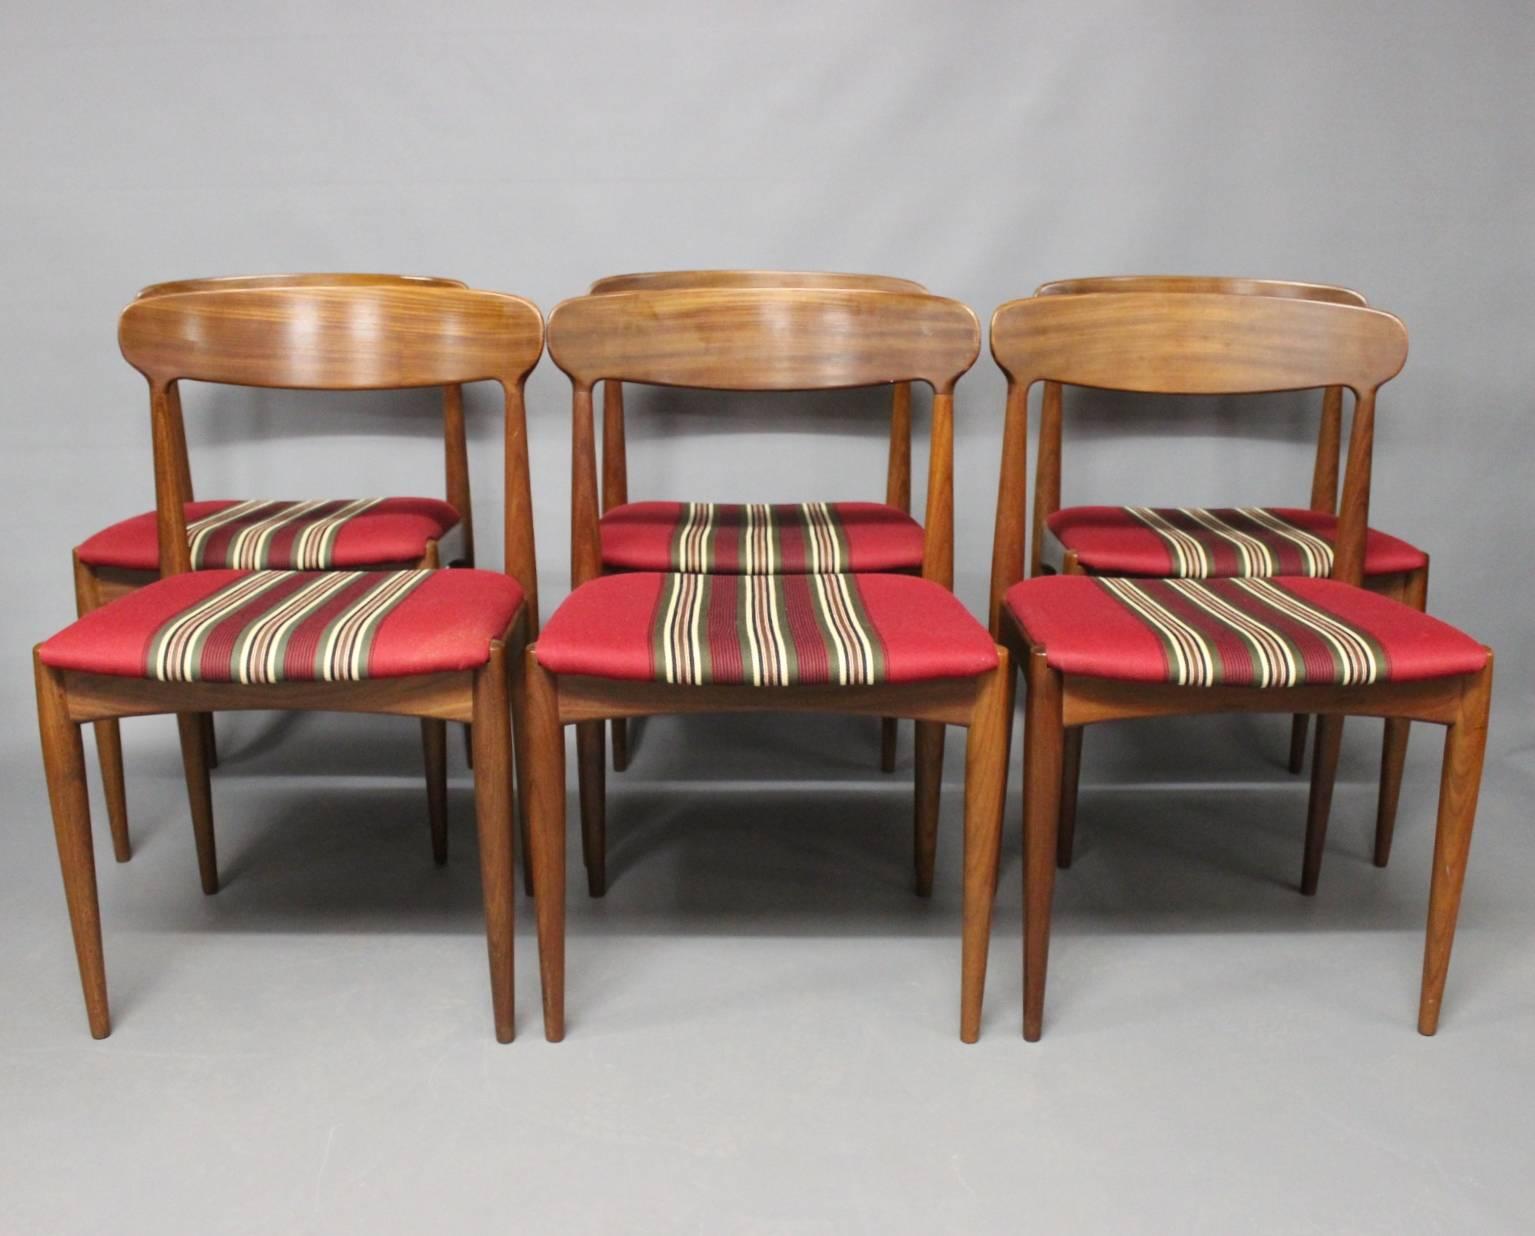 A set of six dining room chairs in rosewood designed by Johannes Andersen and manufactured Uldum furniture factory in the 1960s.